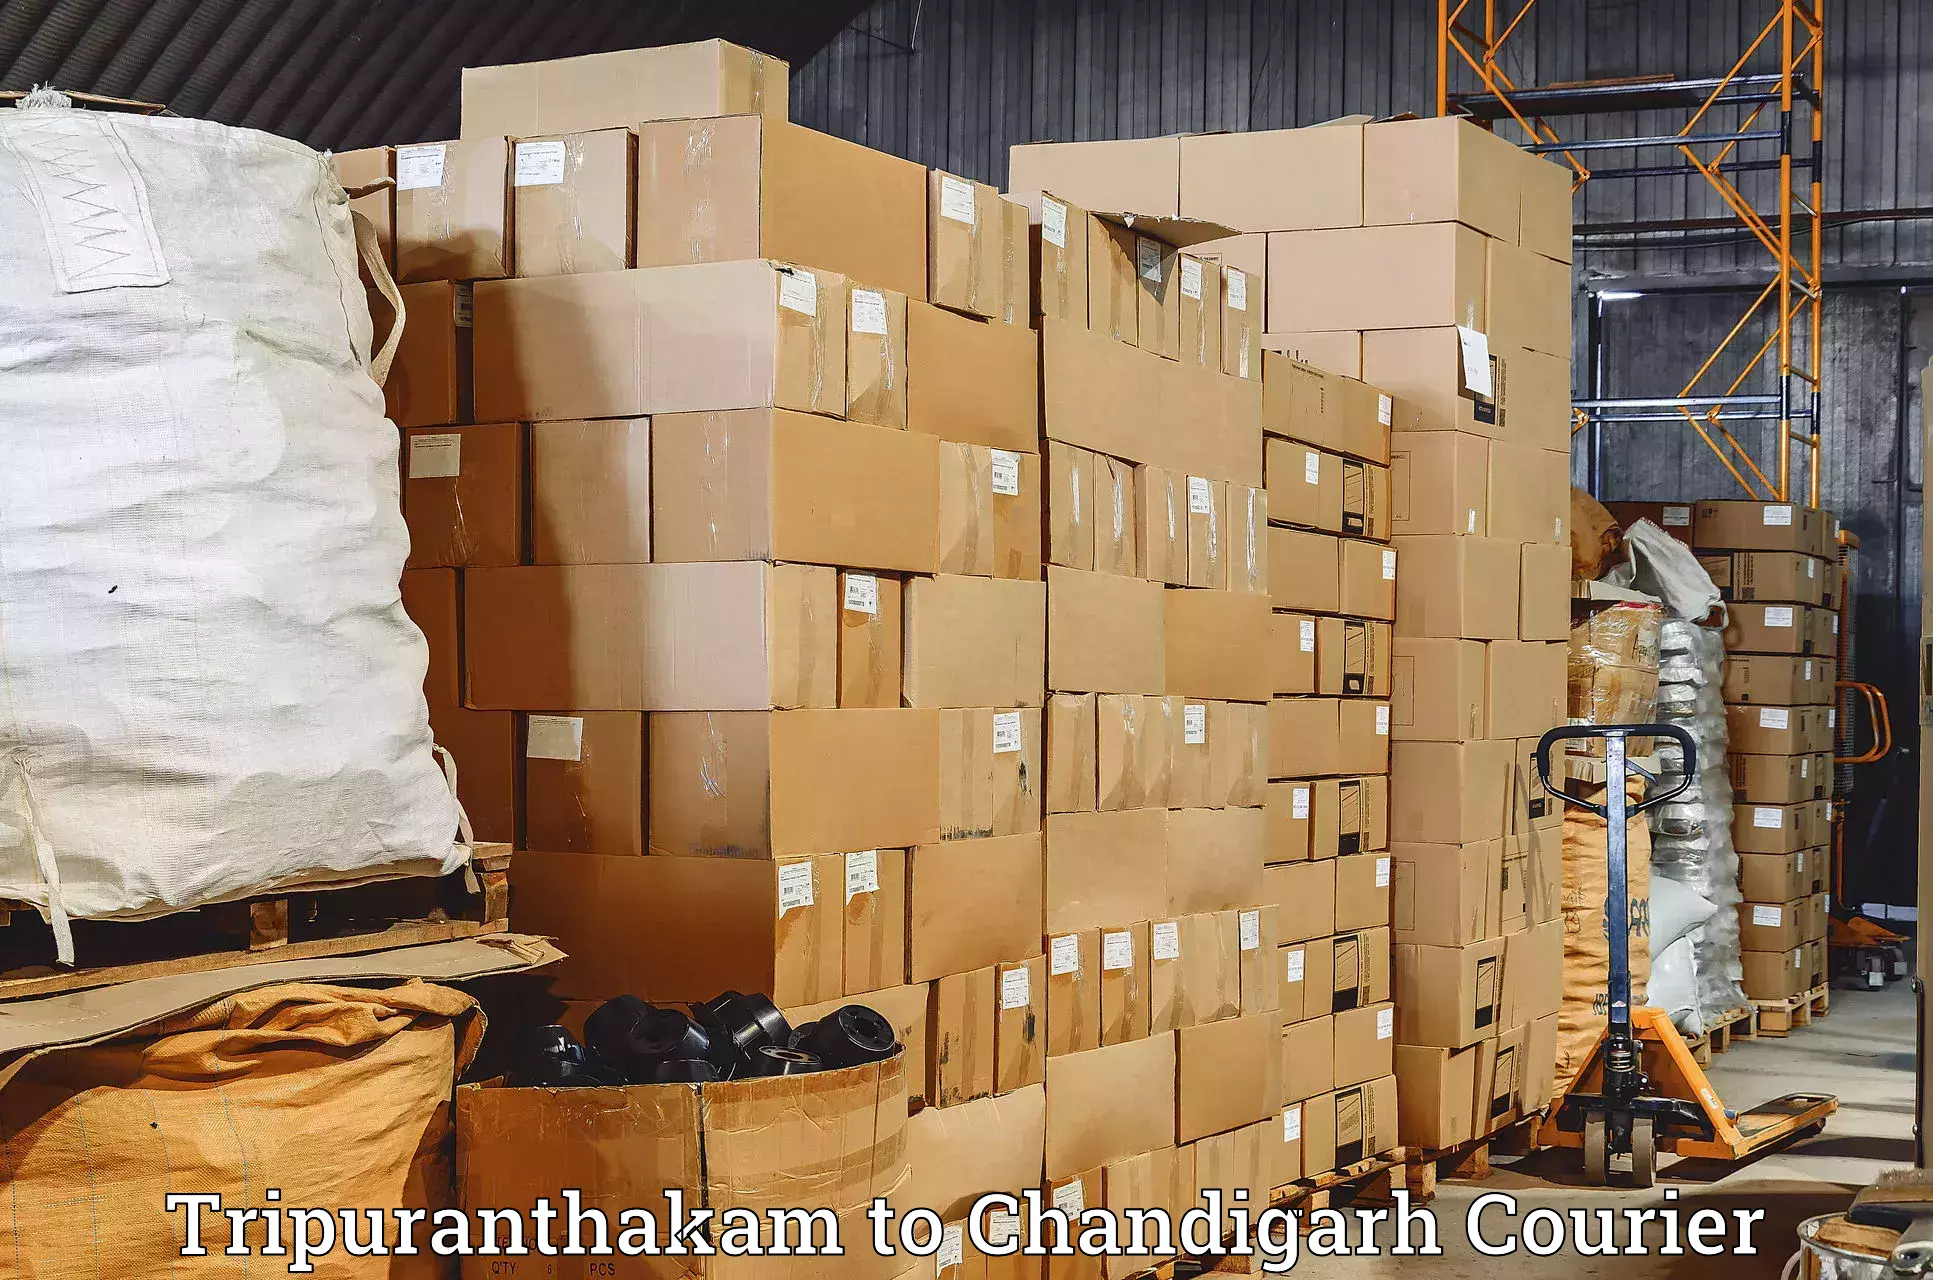 Courier service efficiency Tripuranthakam to Chandigarh